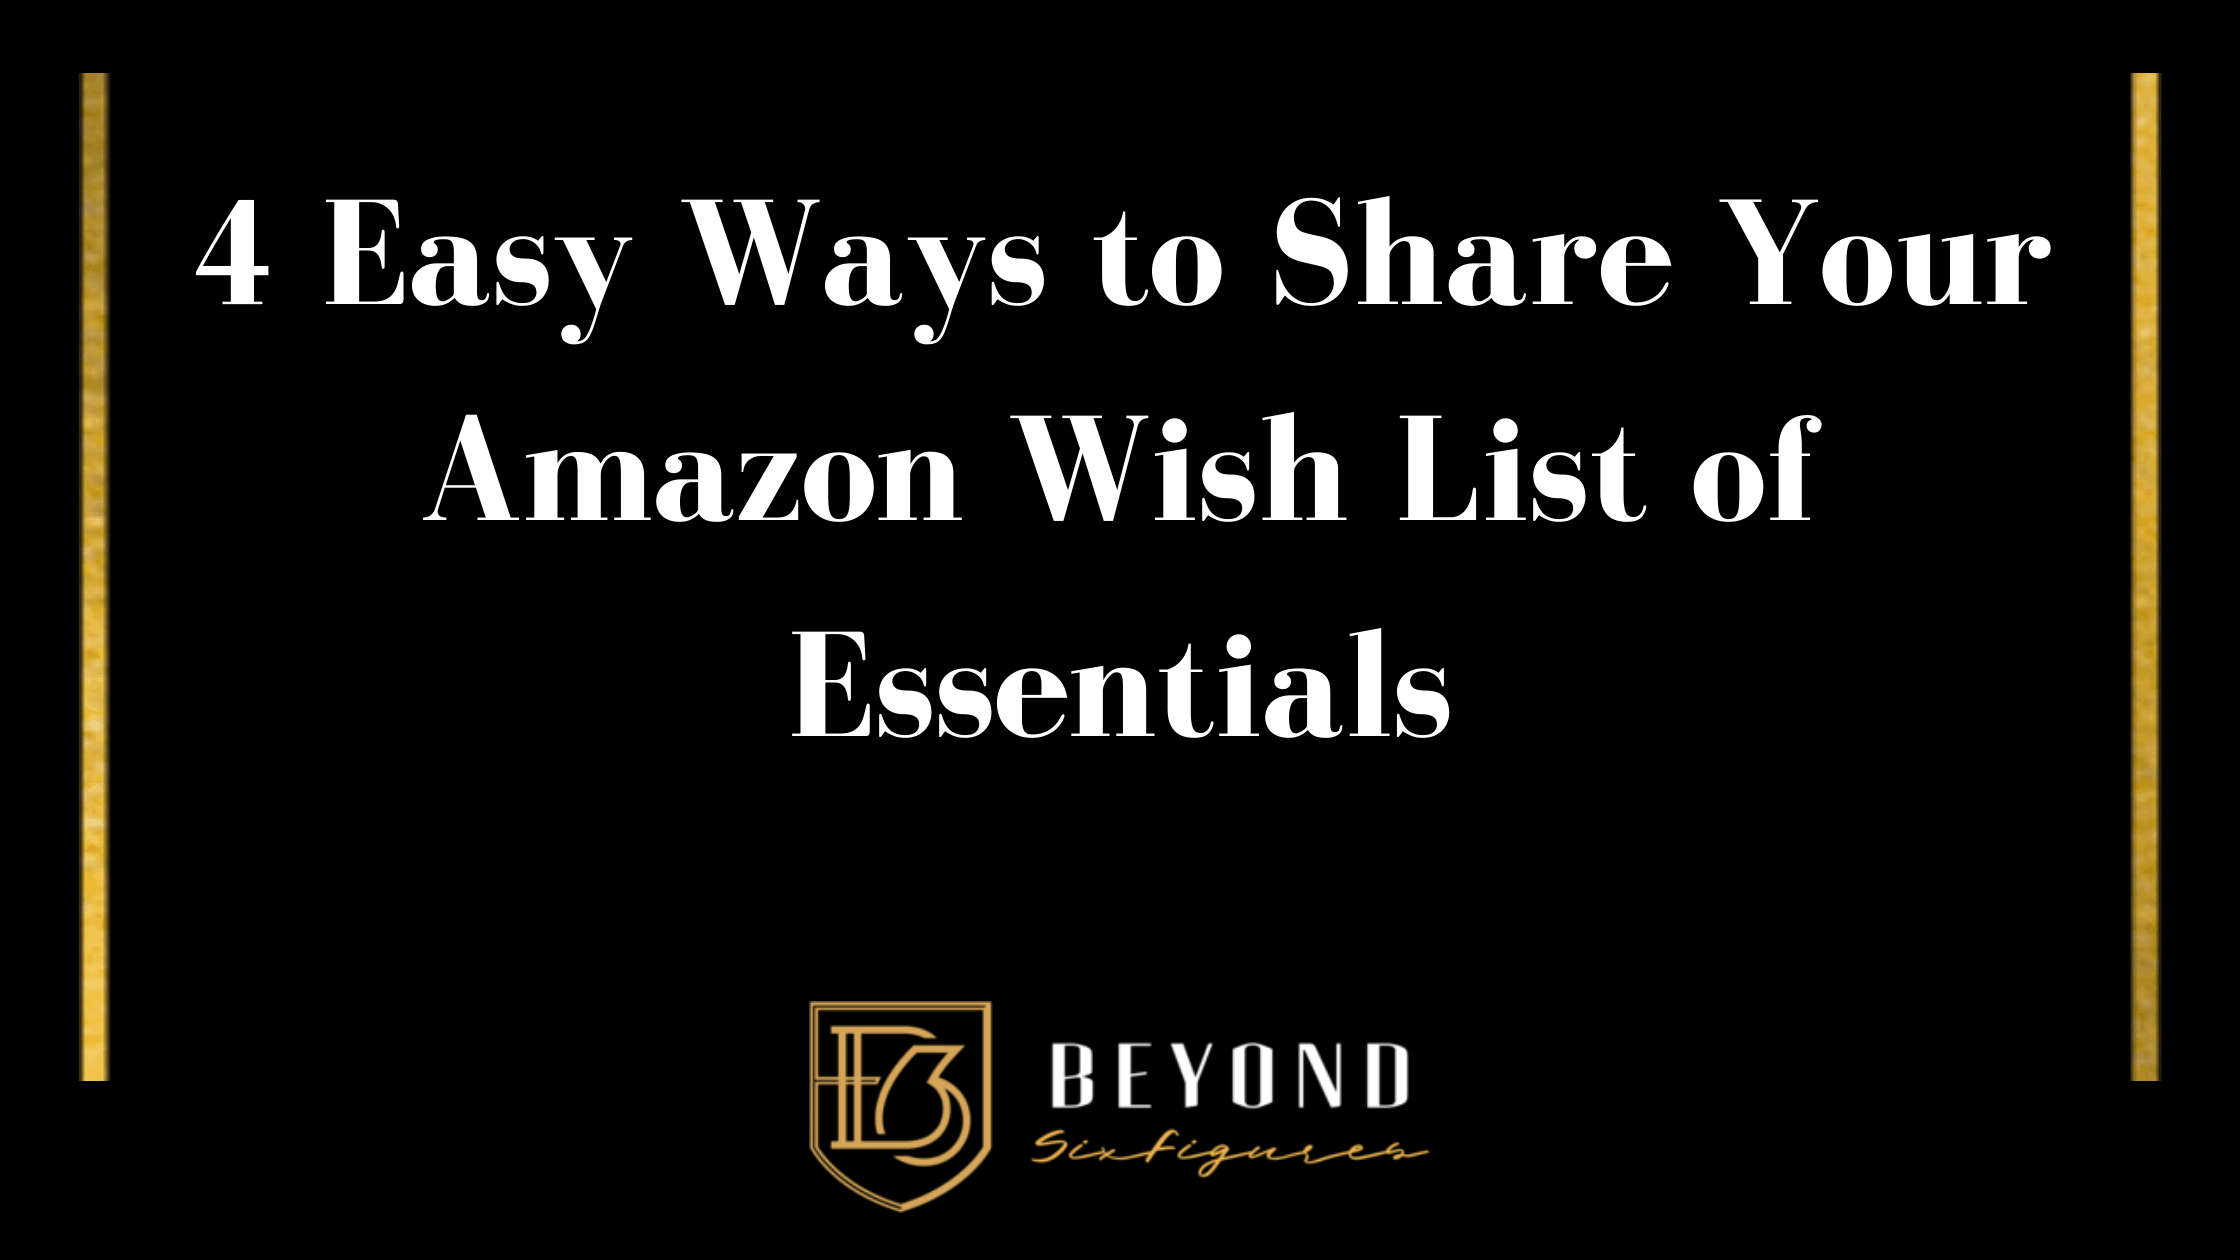 Blog title: How to Share Your Amazon Wish List